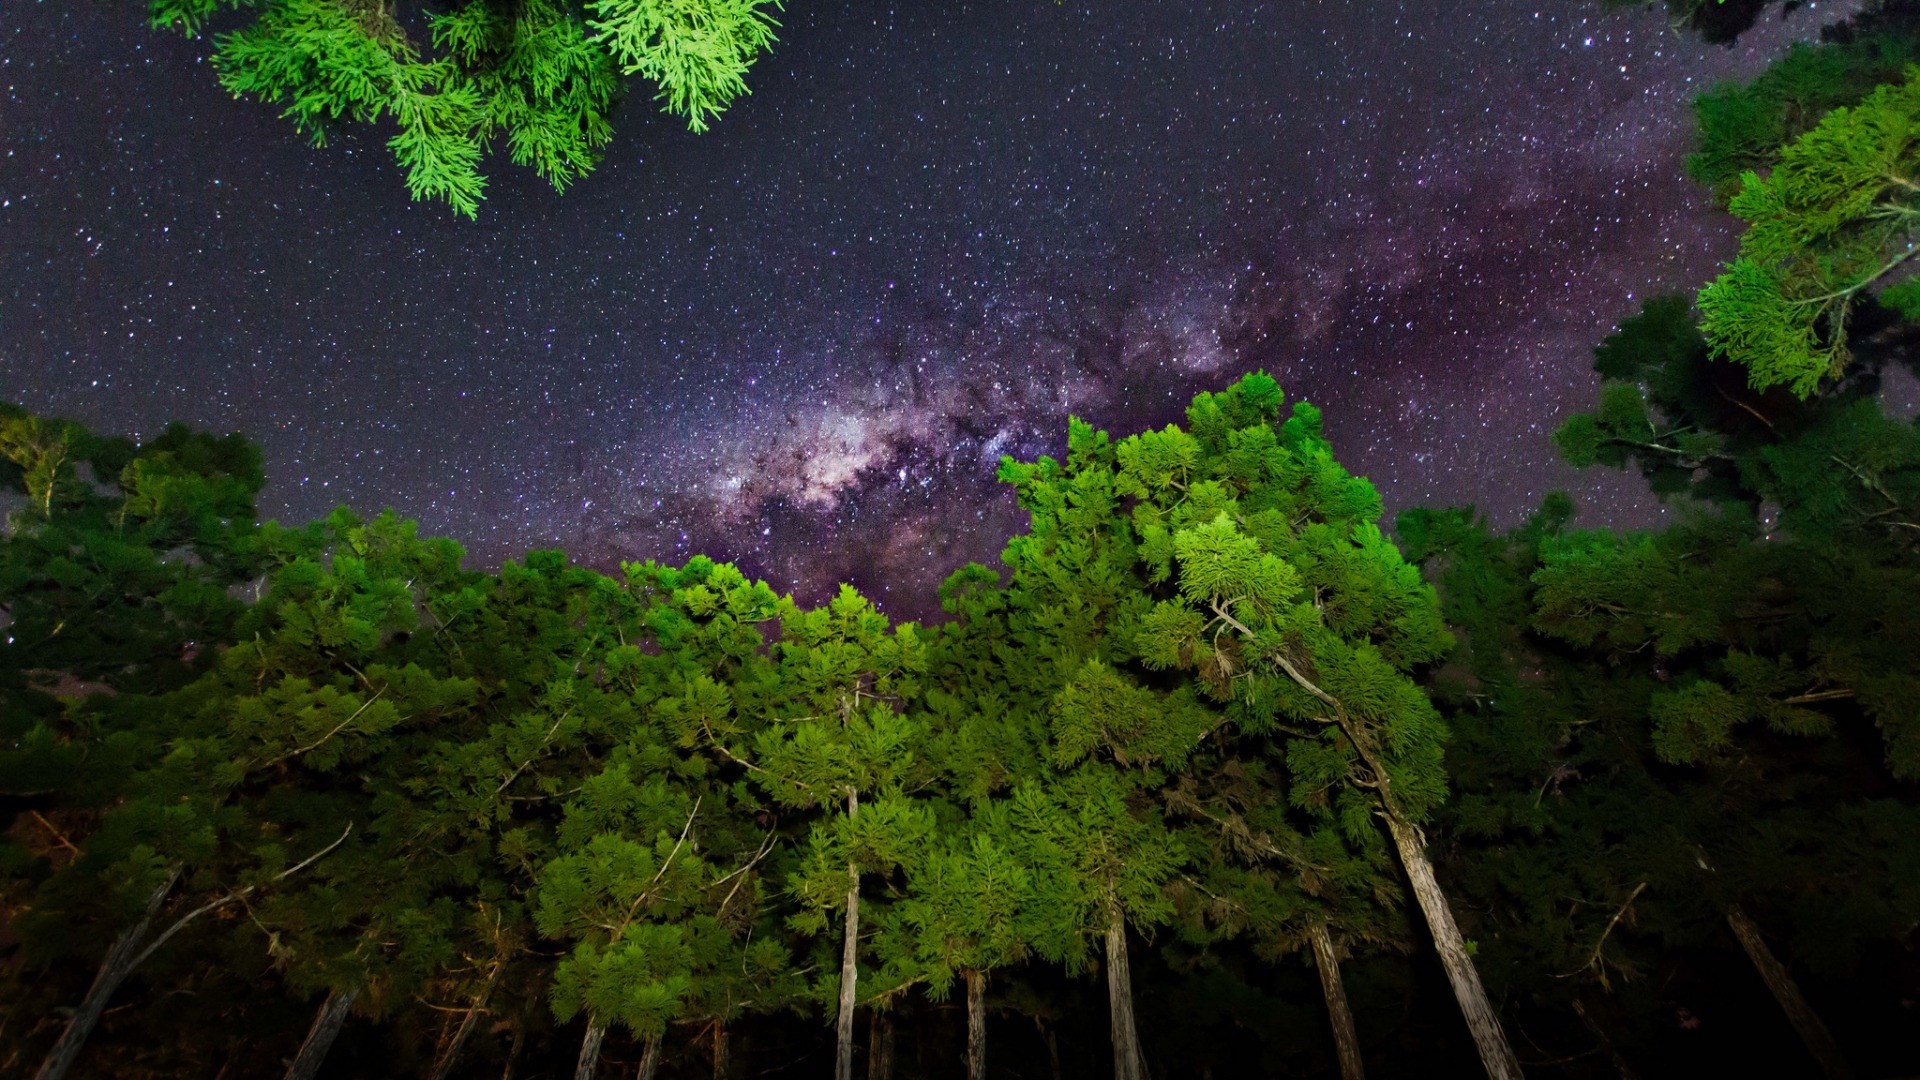 General 1920x1080 nature trees forest branch leaves wood worm's eye view night Milky Way stars clear sky low-angle